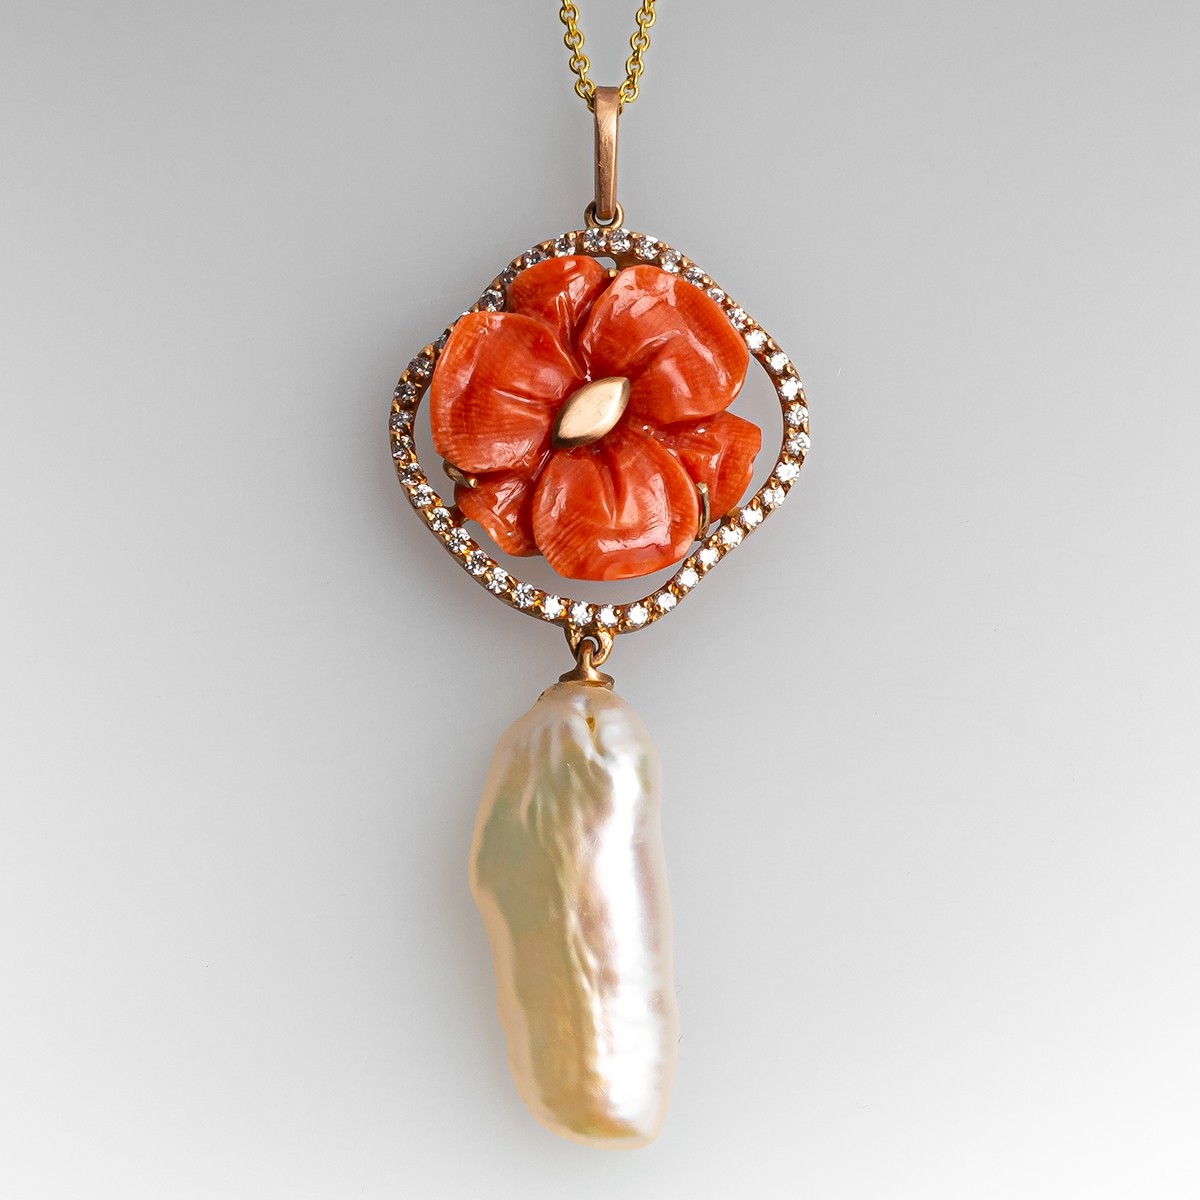 Lovely Coral Pendant